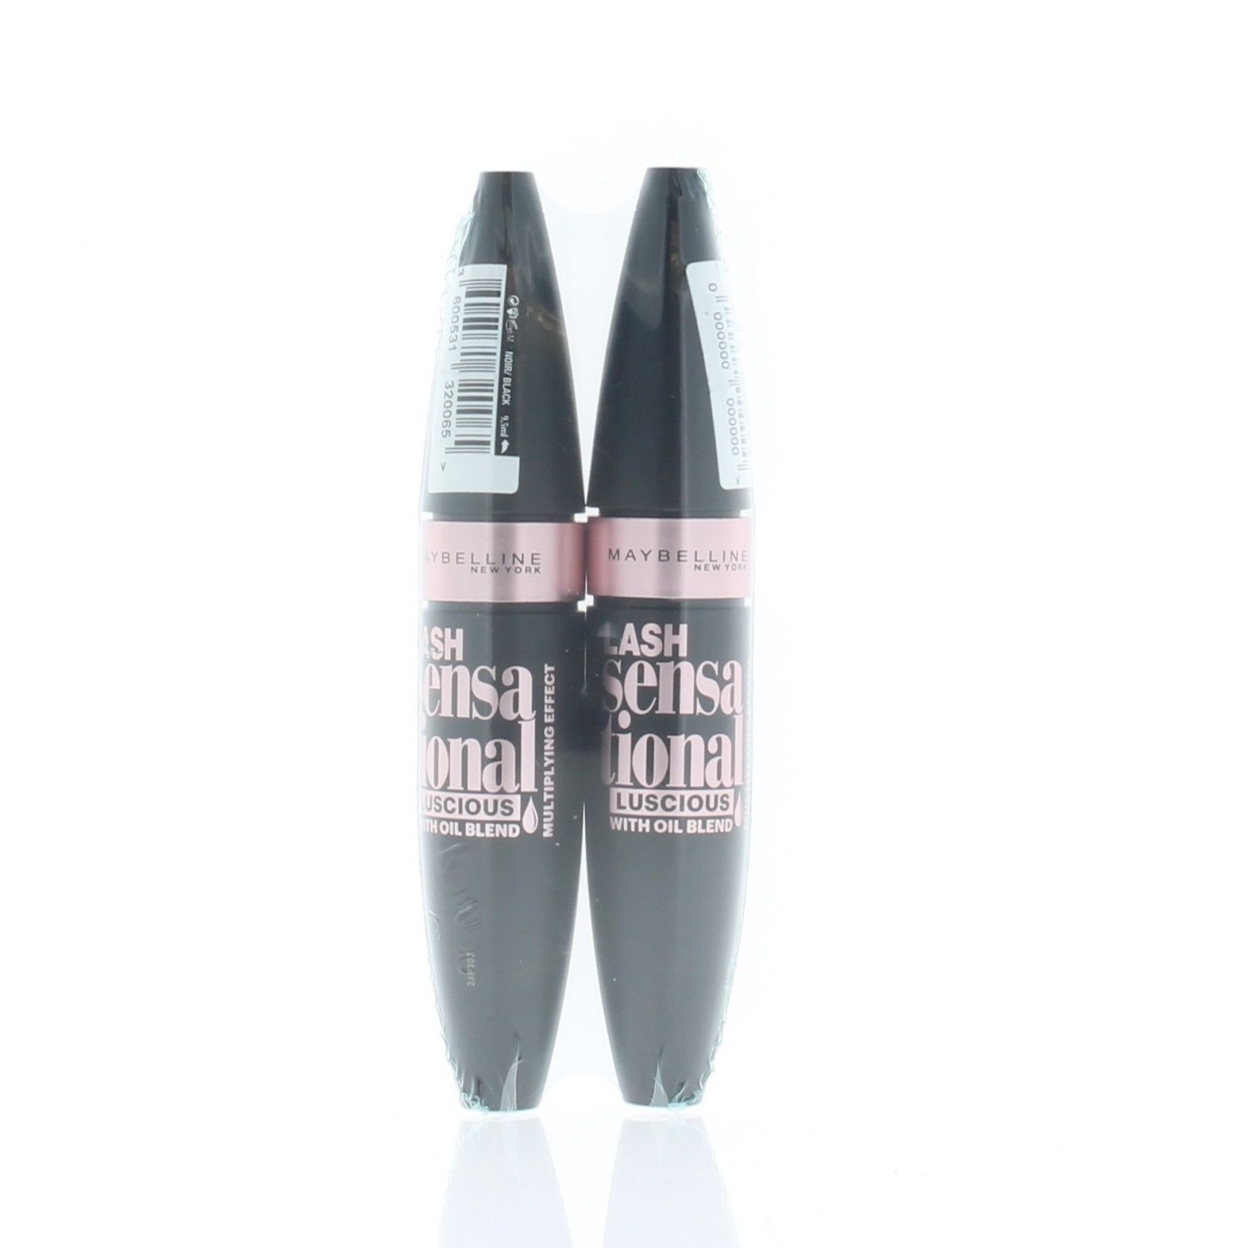 Maybelline Lash Sensational Luscious With Oil Blend Black 9.5ml (2 Pack)